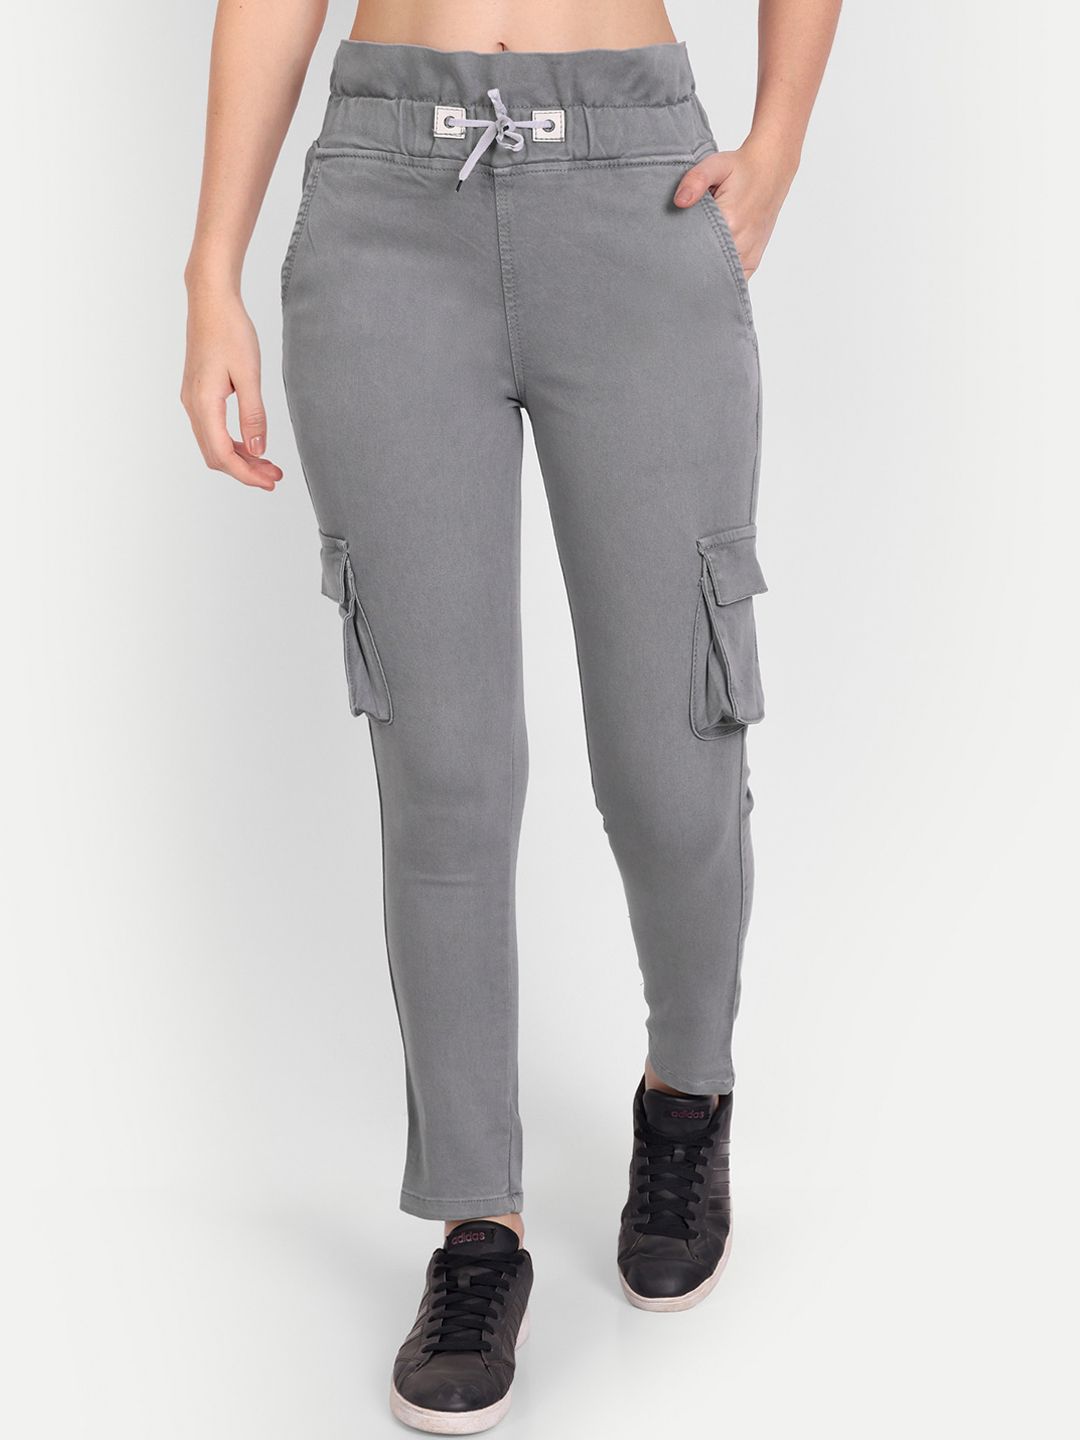 BAESD Women Grey Relaxed Cargos Trousers Price in India